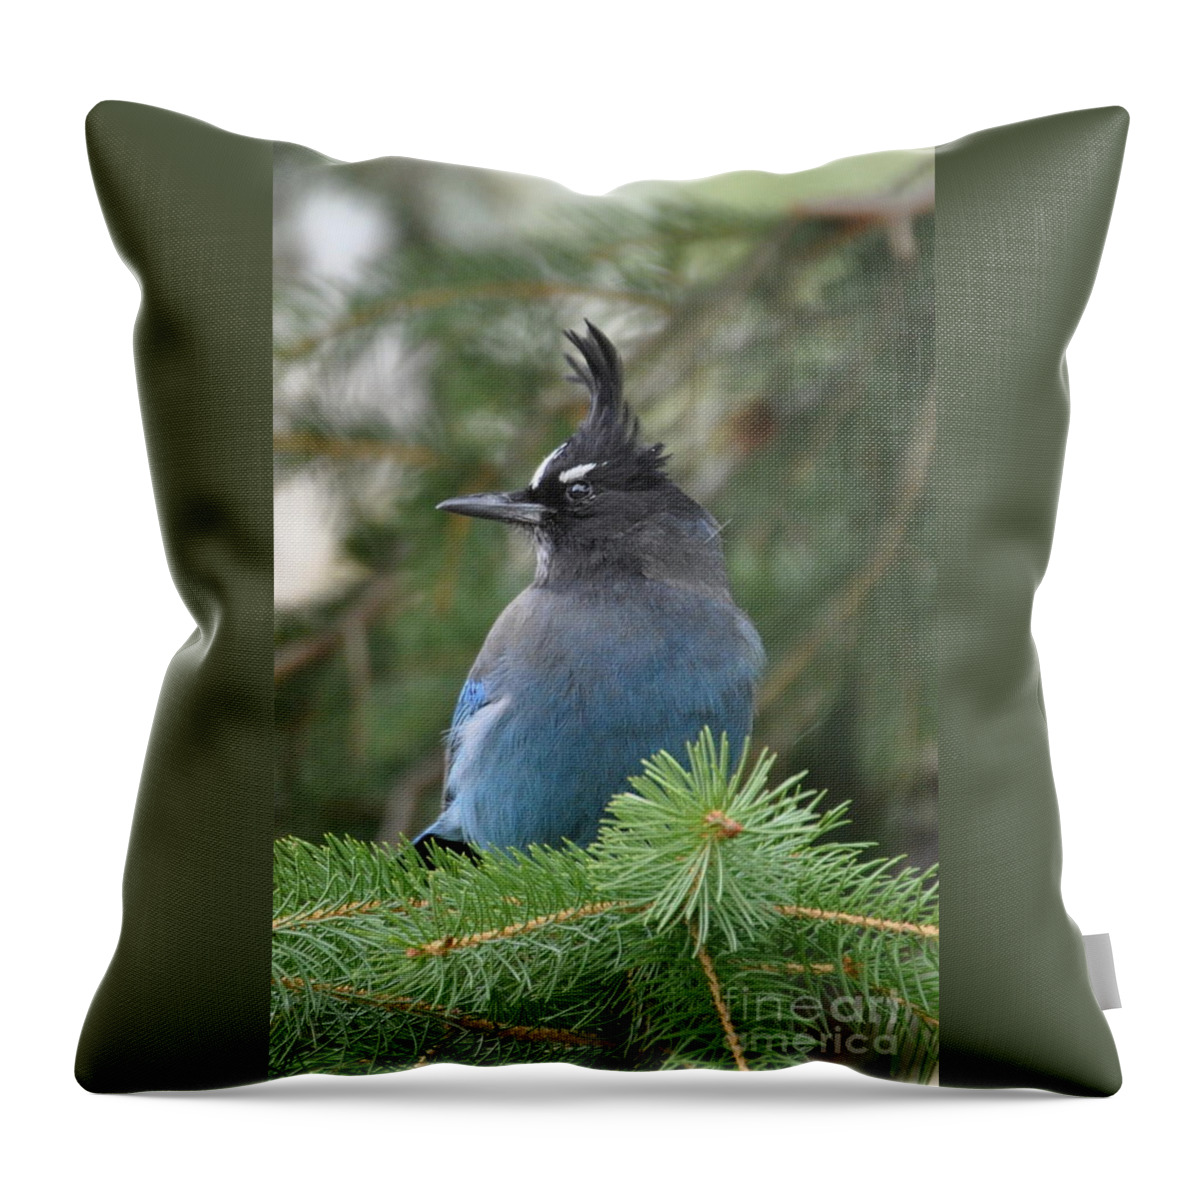 Birds Throw Pillow featuring the photograph Bad Hair Day by Dorrene BrownButterfield